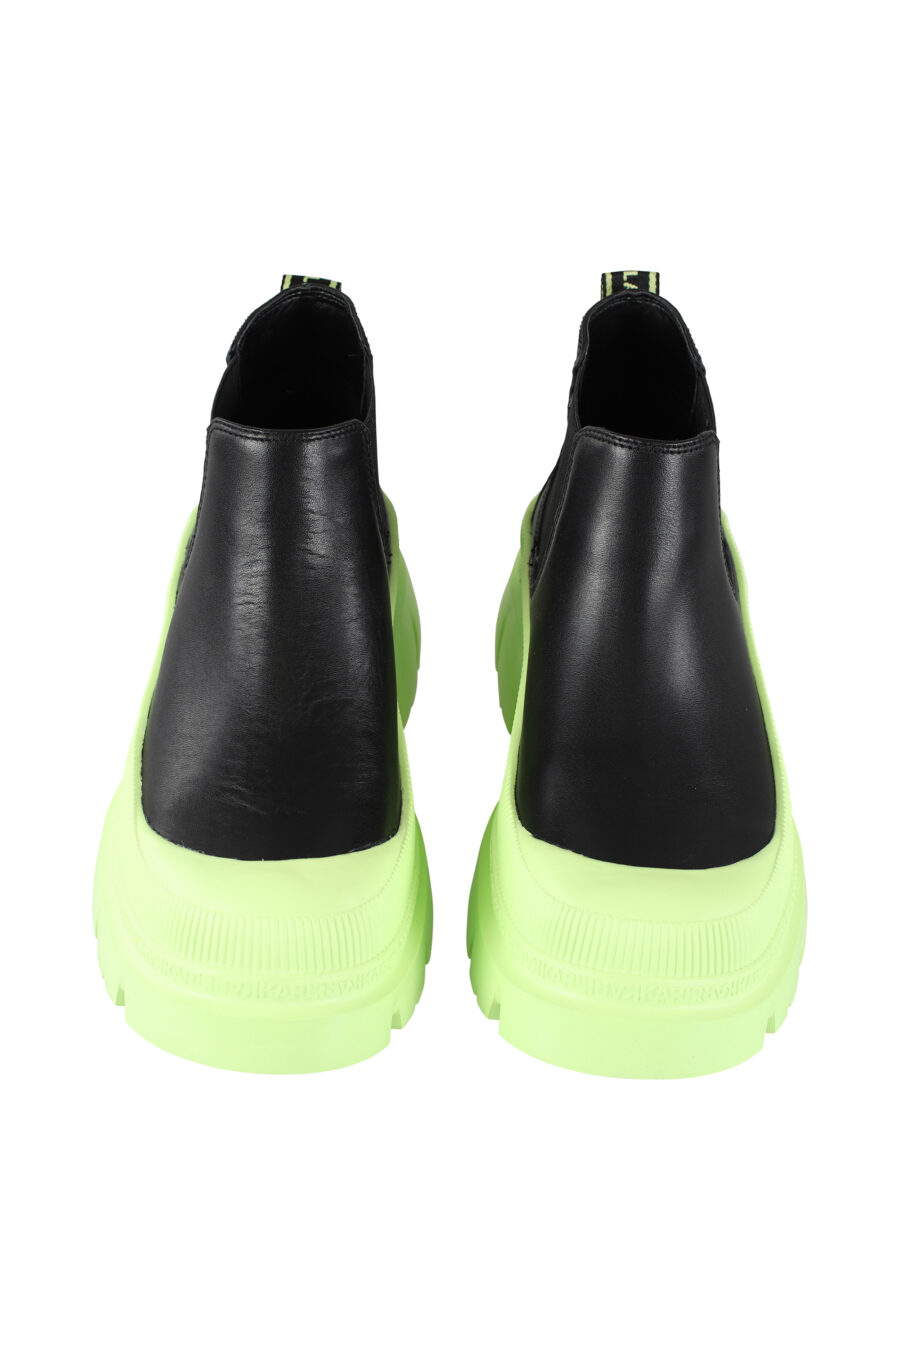 Black ankle boots with logo and lime green sole - IMG 9616